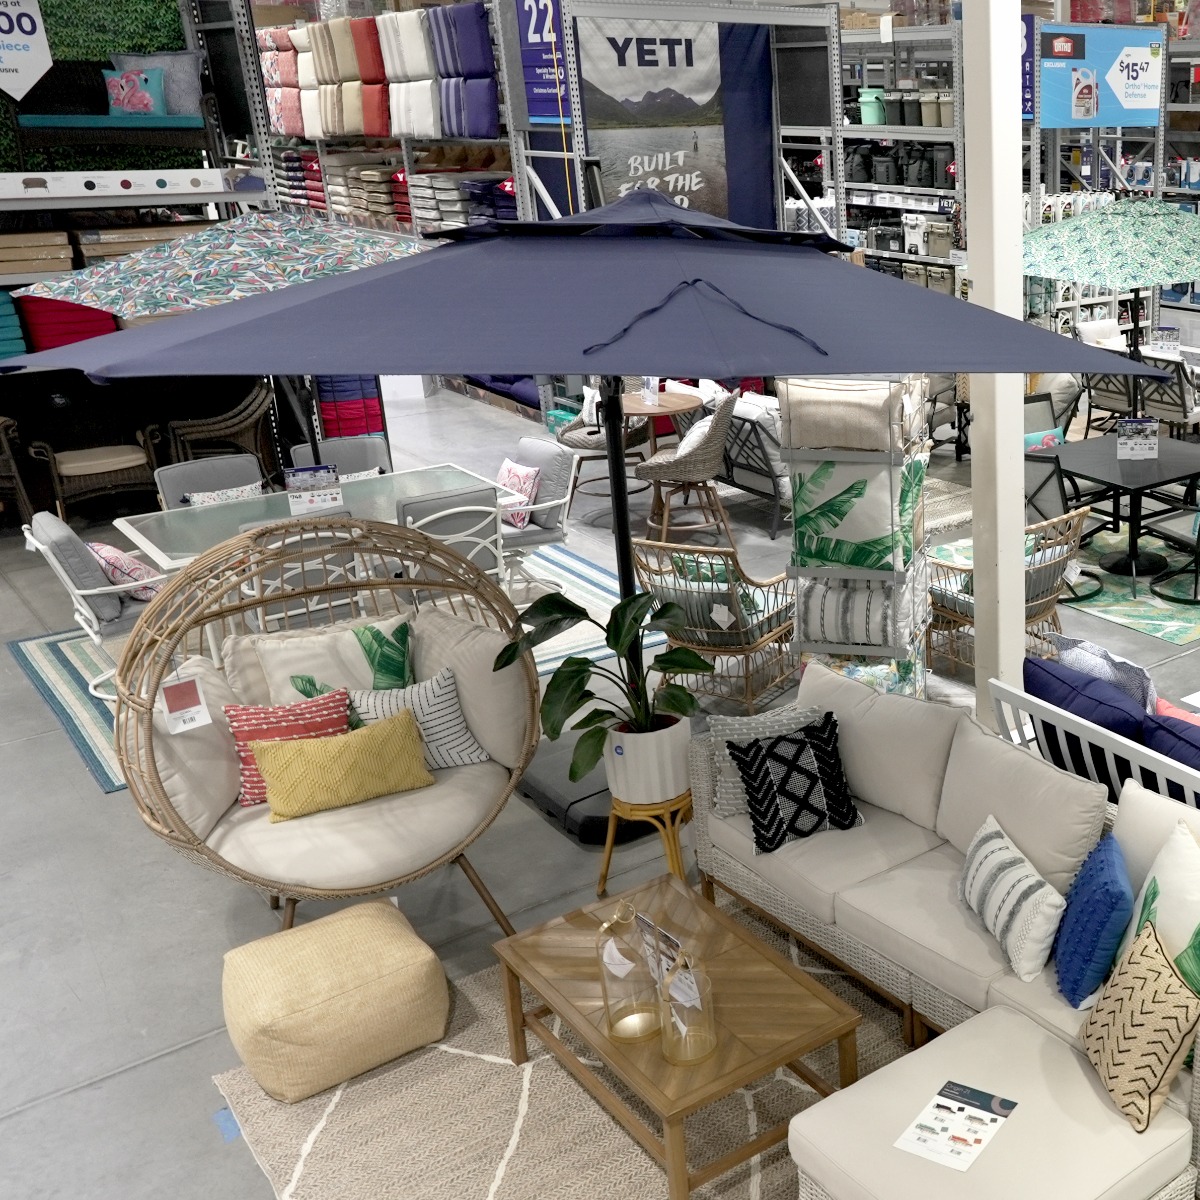 Lowe's Outdoor Living Patio Deals for Spring Fest 2022 - Image courtesy of Lowe's